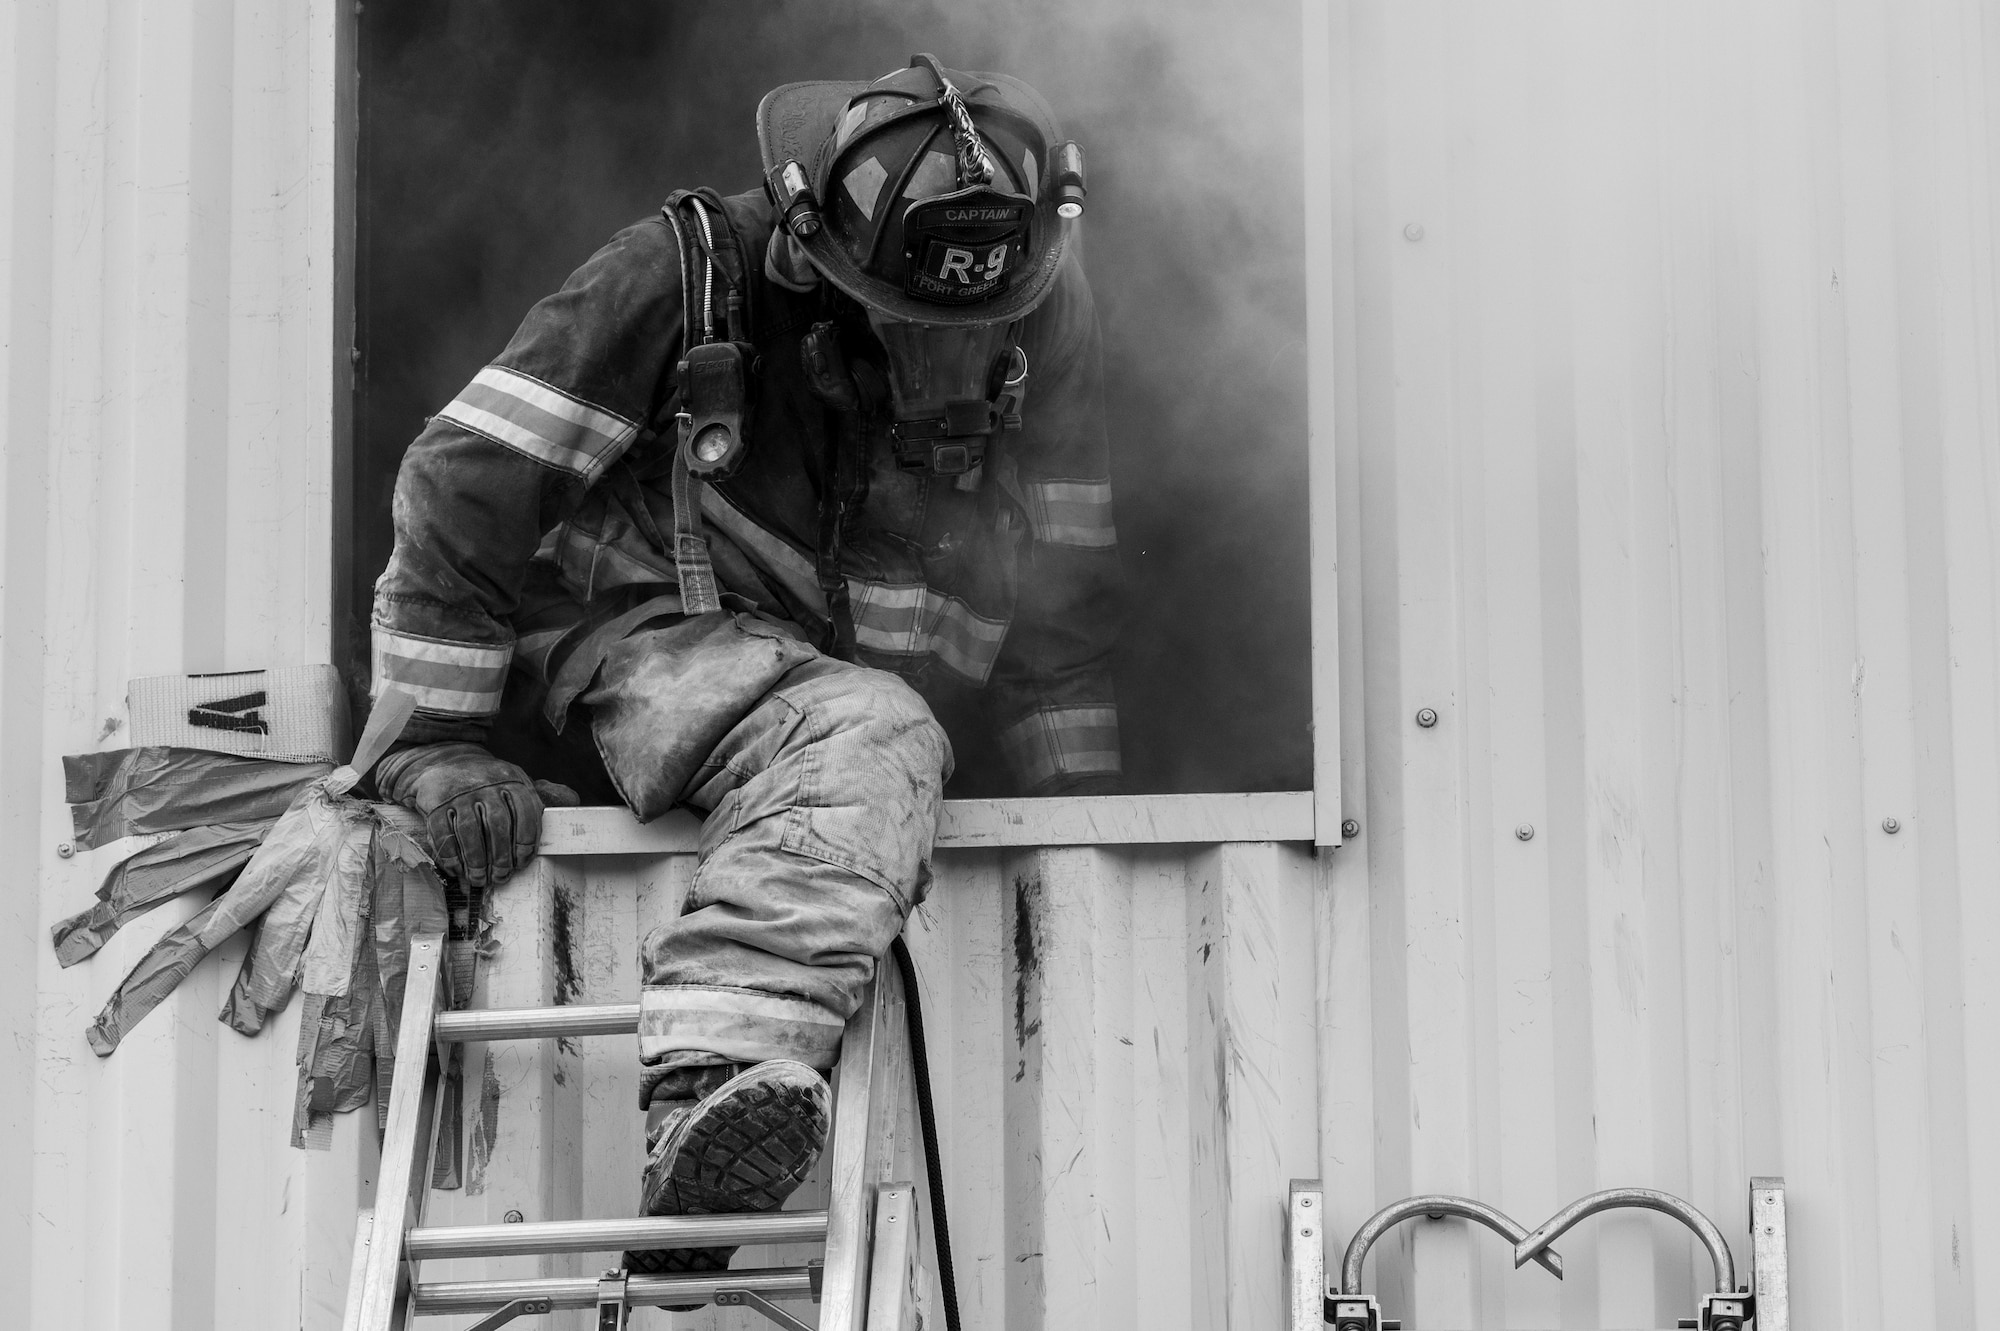 A masked firefighter exits a smoking building via window. Leaned up against the window, a metal ladder is visible.